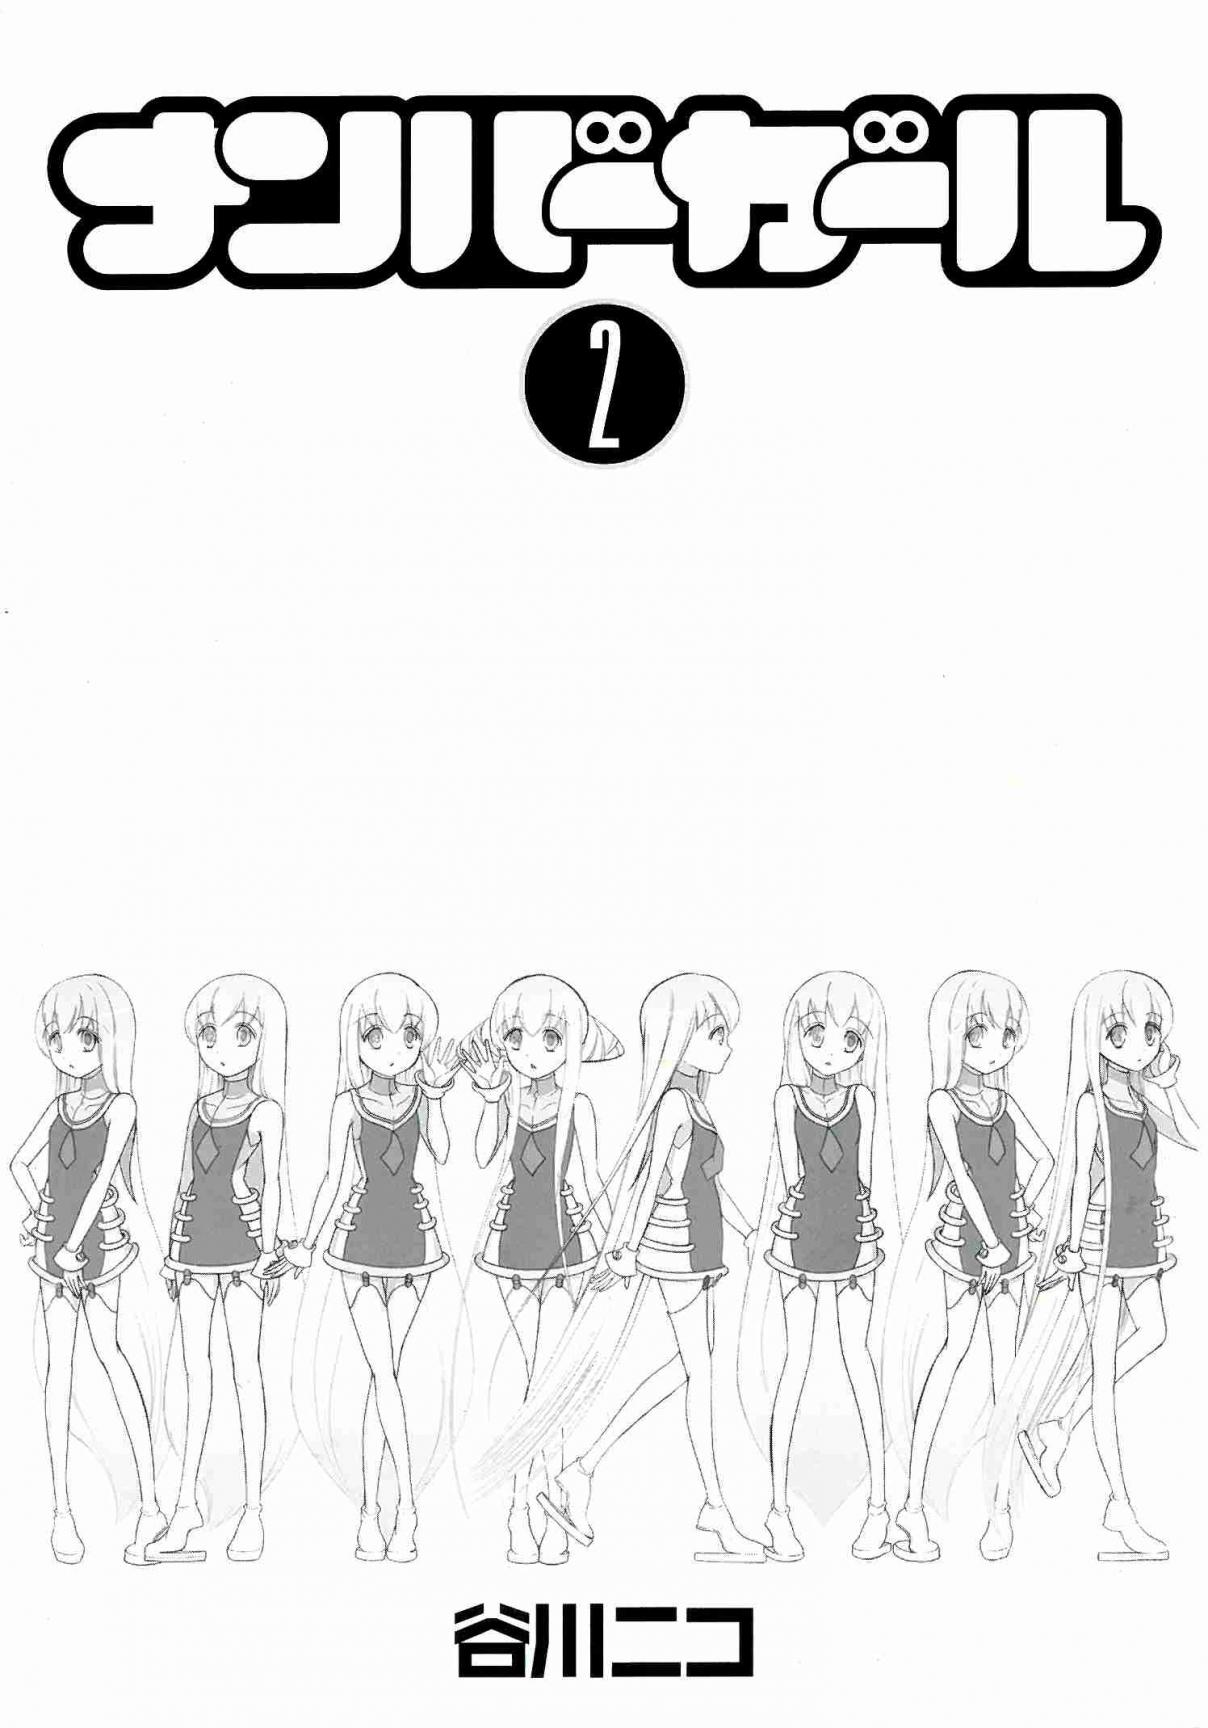 Number Girl Vol. 2 Ch. 35